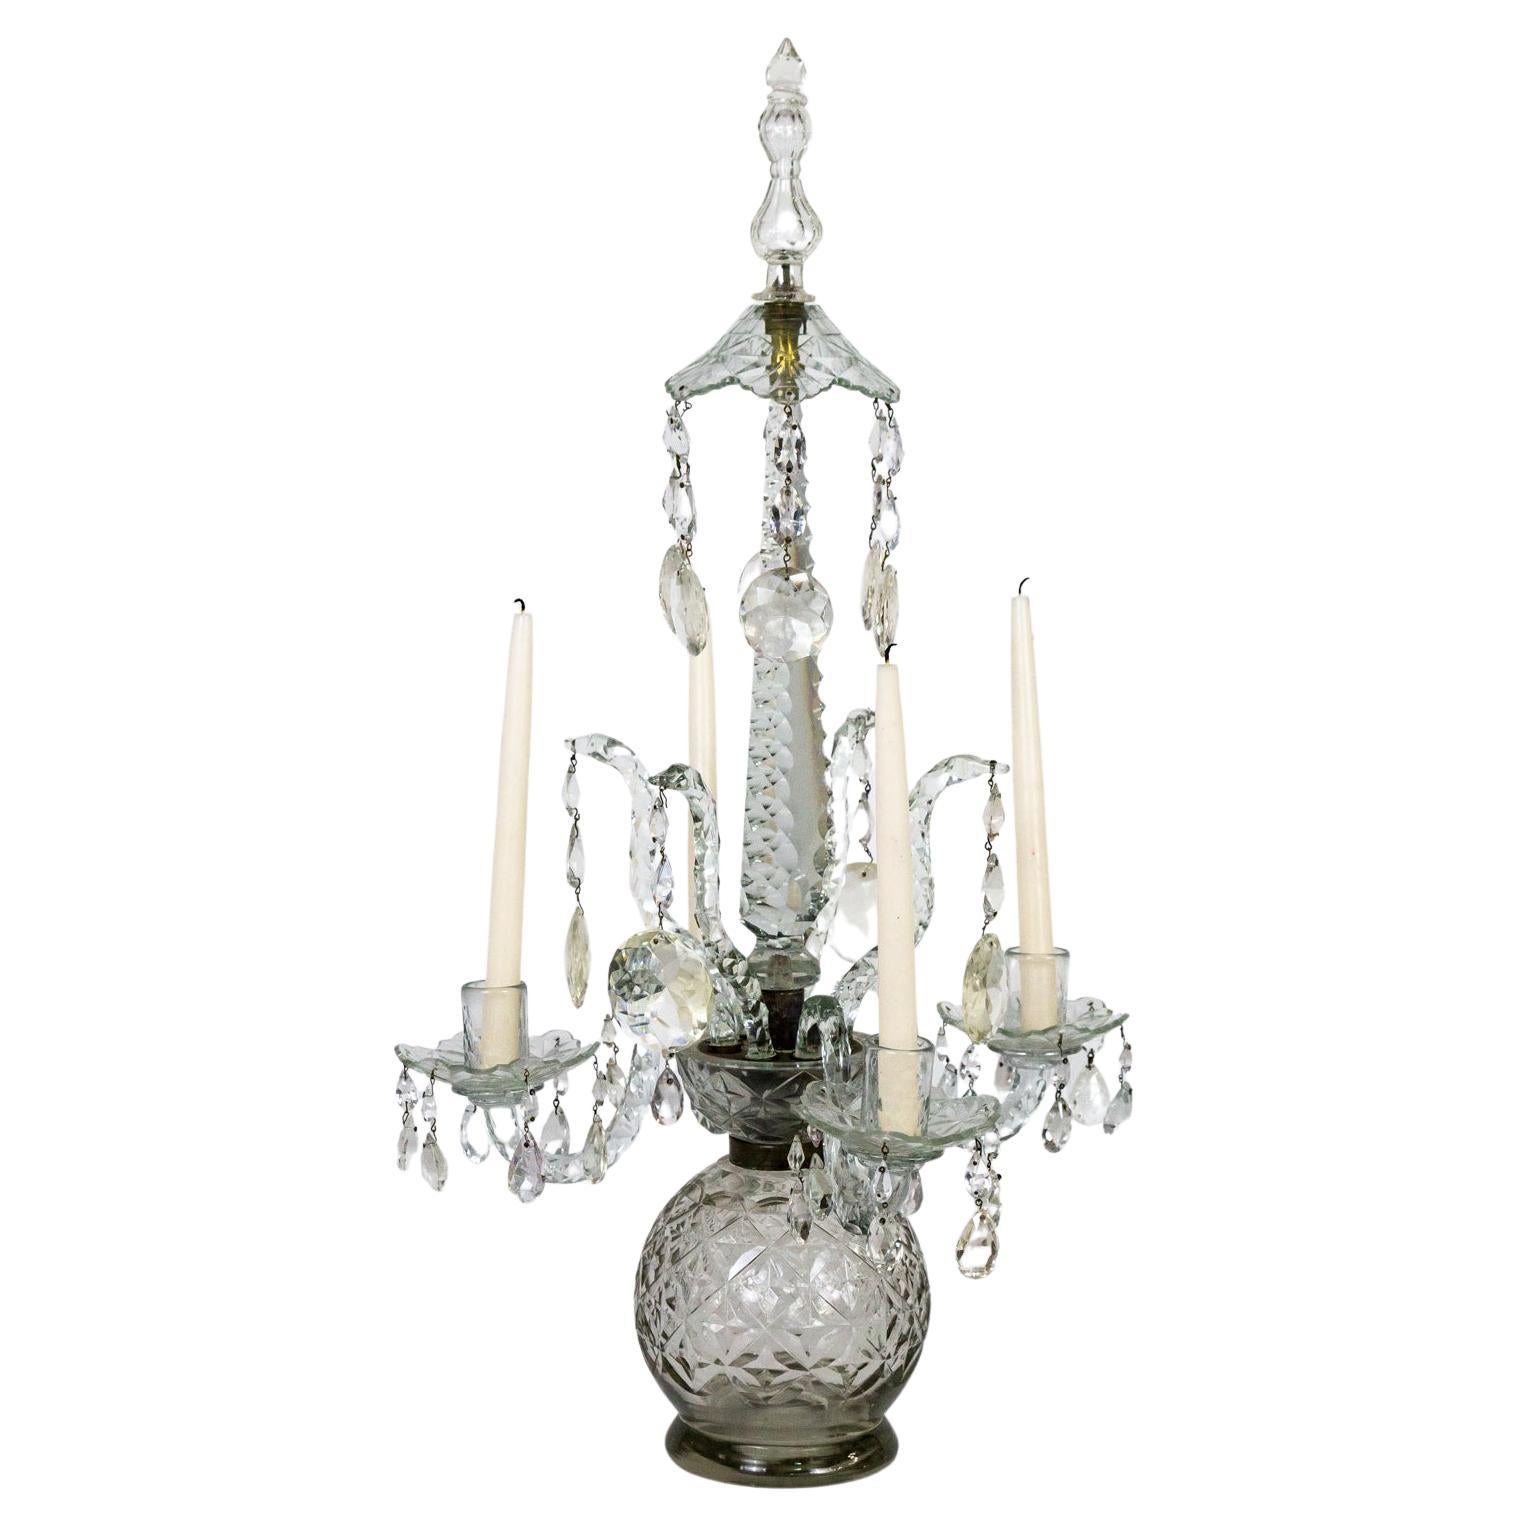 Henry iii 19th Cent. Cut Crystal 4-Arm Candelabra For Sale